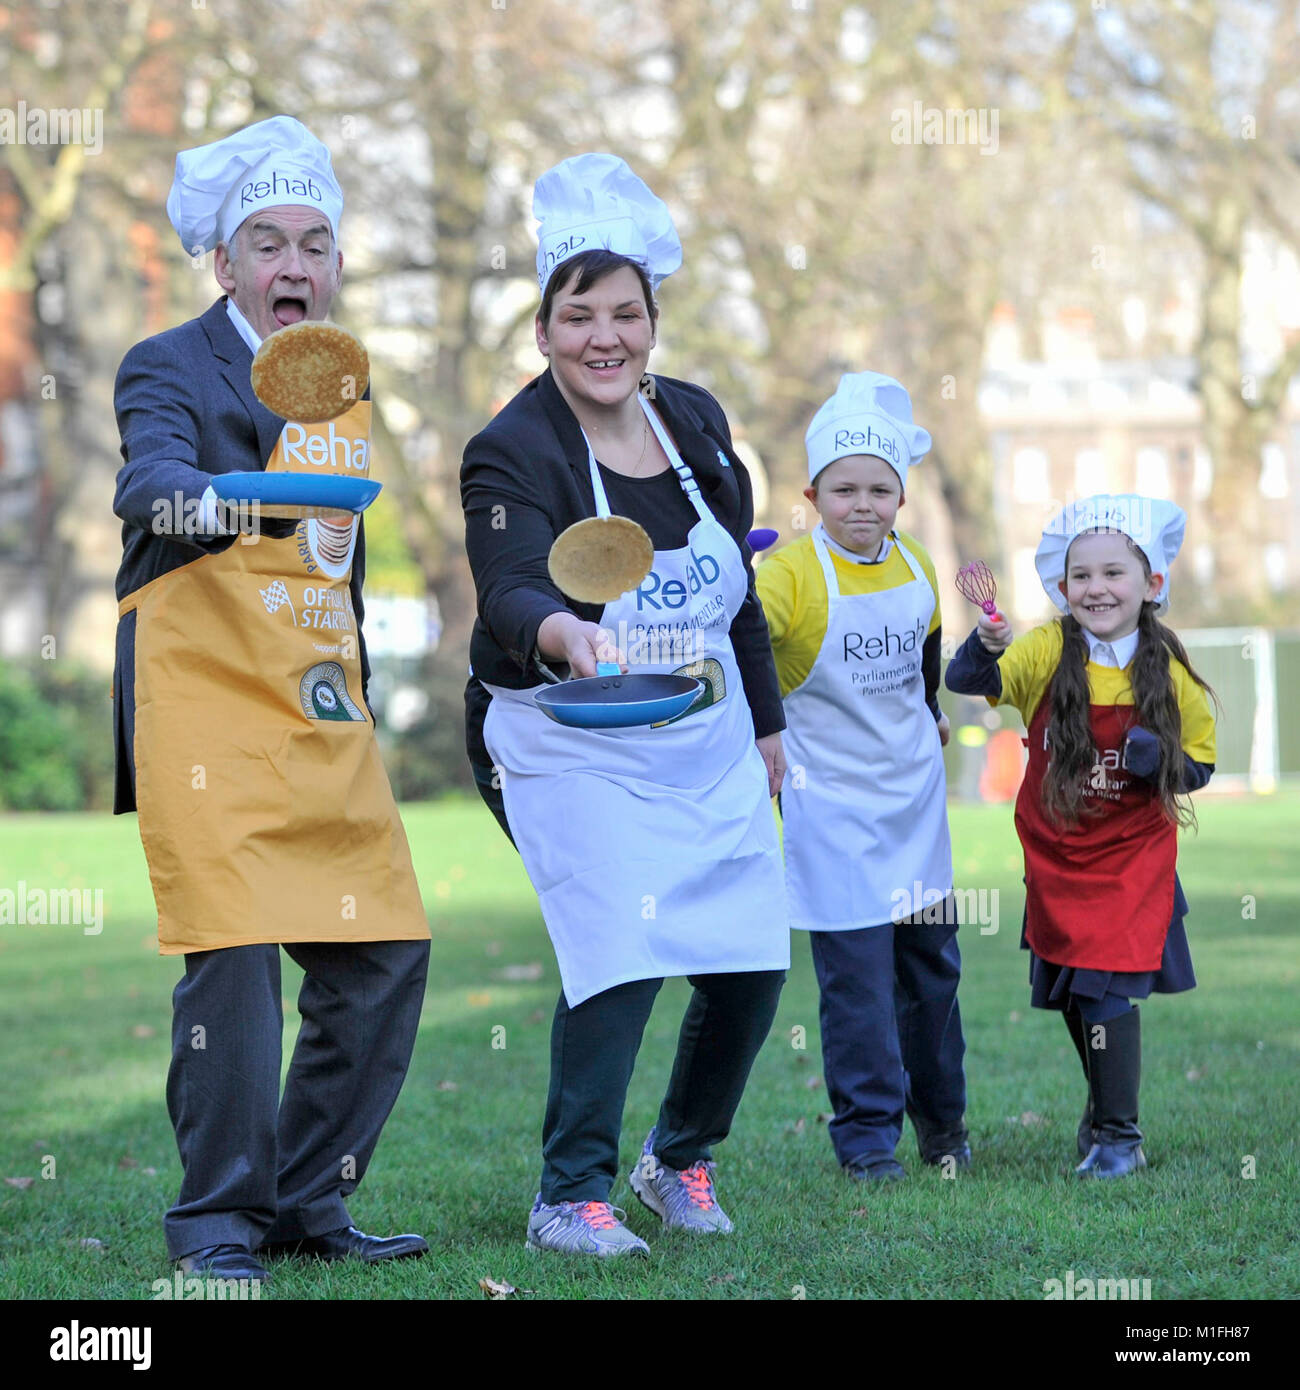 London, UK. 30th Jan, 2018. Race veteran and this year's Official Starter, ITV newscaster, Alastair Stewart OBE, oversees Tonia Antoniazzi MP for the Parliament Team, take part in a pancake race bootcamp in Westminster ahead of the main event, the Rehab Parliamentary Pancake Race, on Shrove Tuesday. They are joined by team mascots Grace and Jacob, both aged 8, from St Matthew's Primary School in Westminster. Credit: Stephen Chung/Alamy Live News Stock Photo